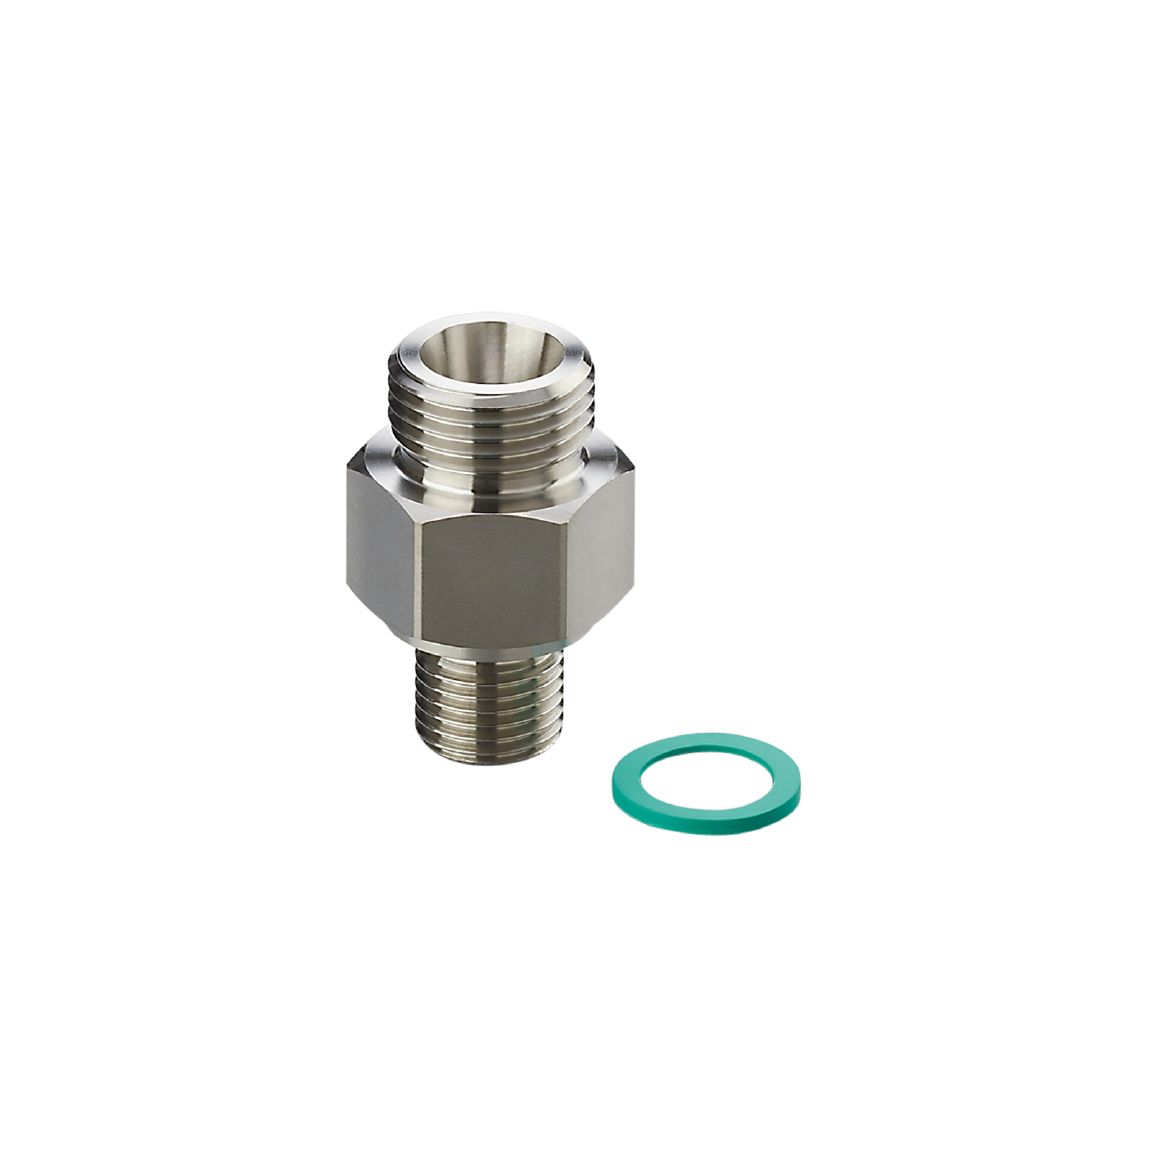 E40235 - Screw-in adapter for process sensors - ifm